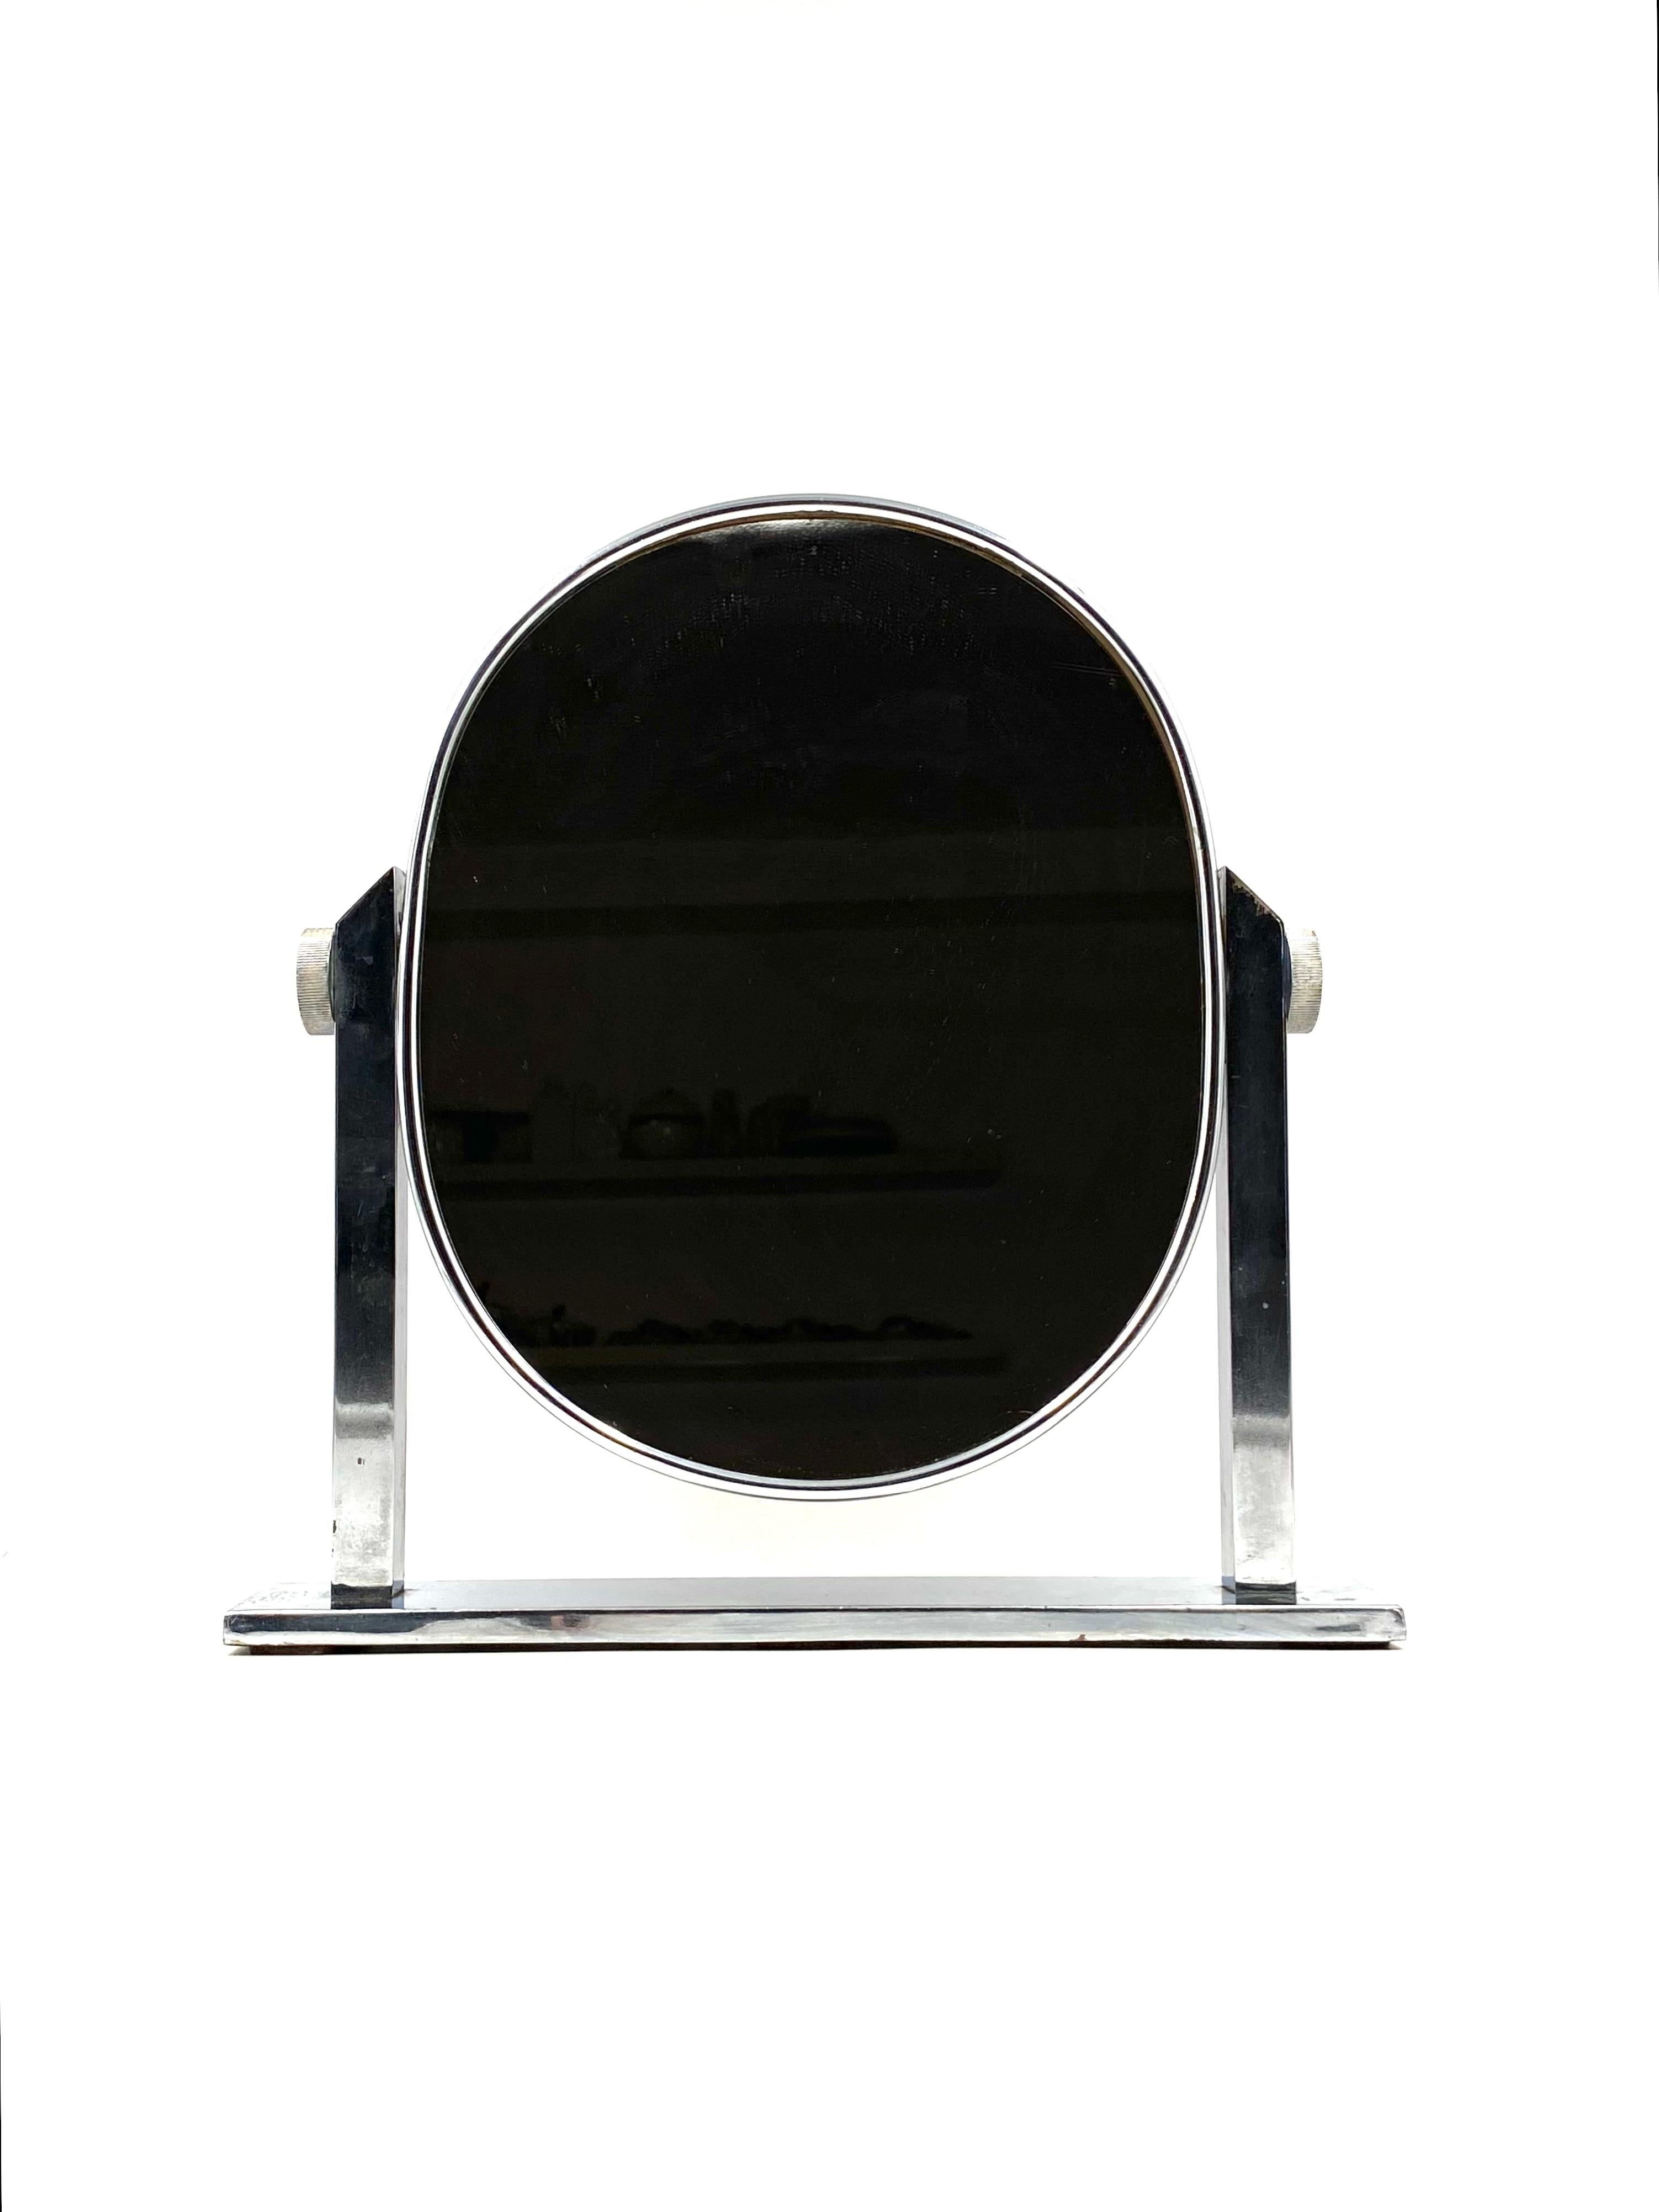 Mid-Century Modern Midcentury Nickel-Plated Brass Table Mirror / Vanity, Italy, 1960s For Sale